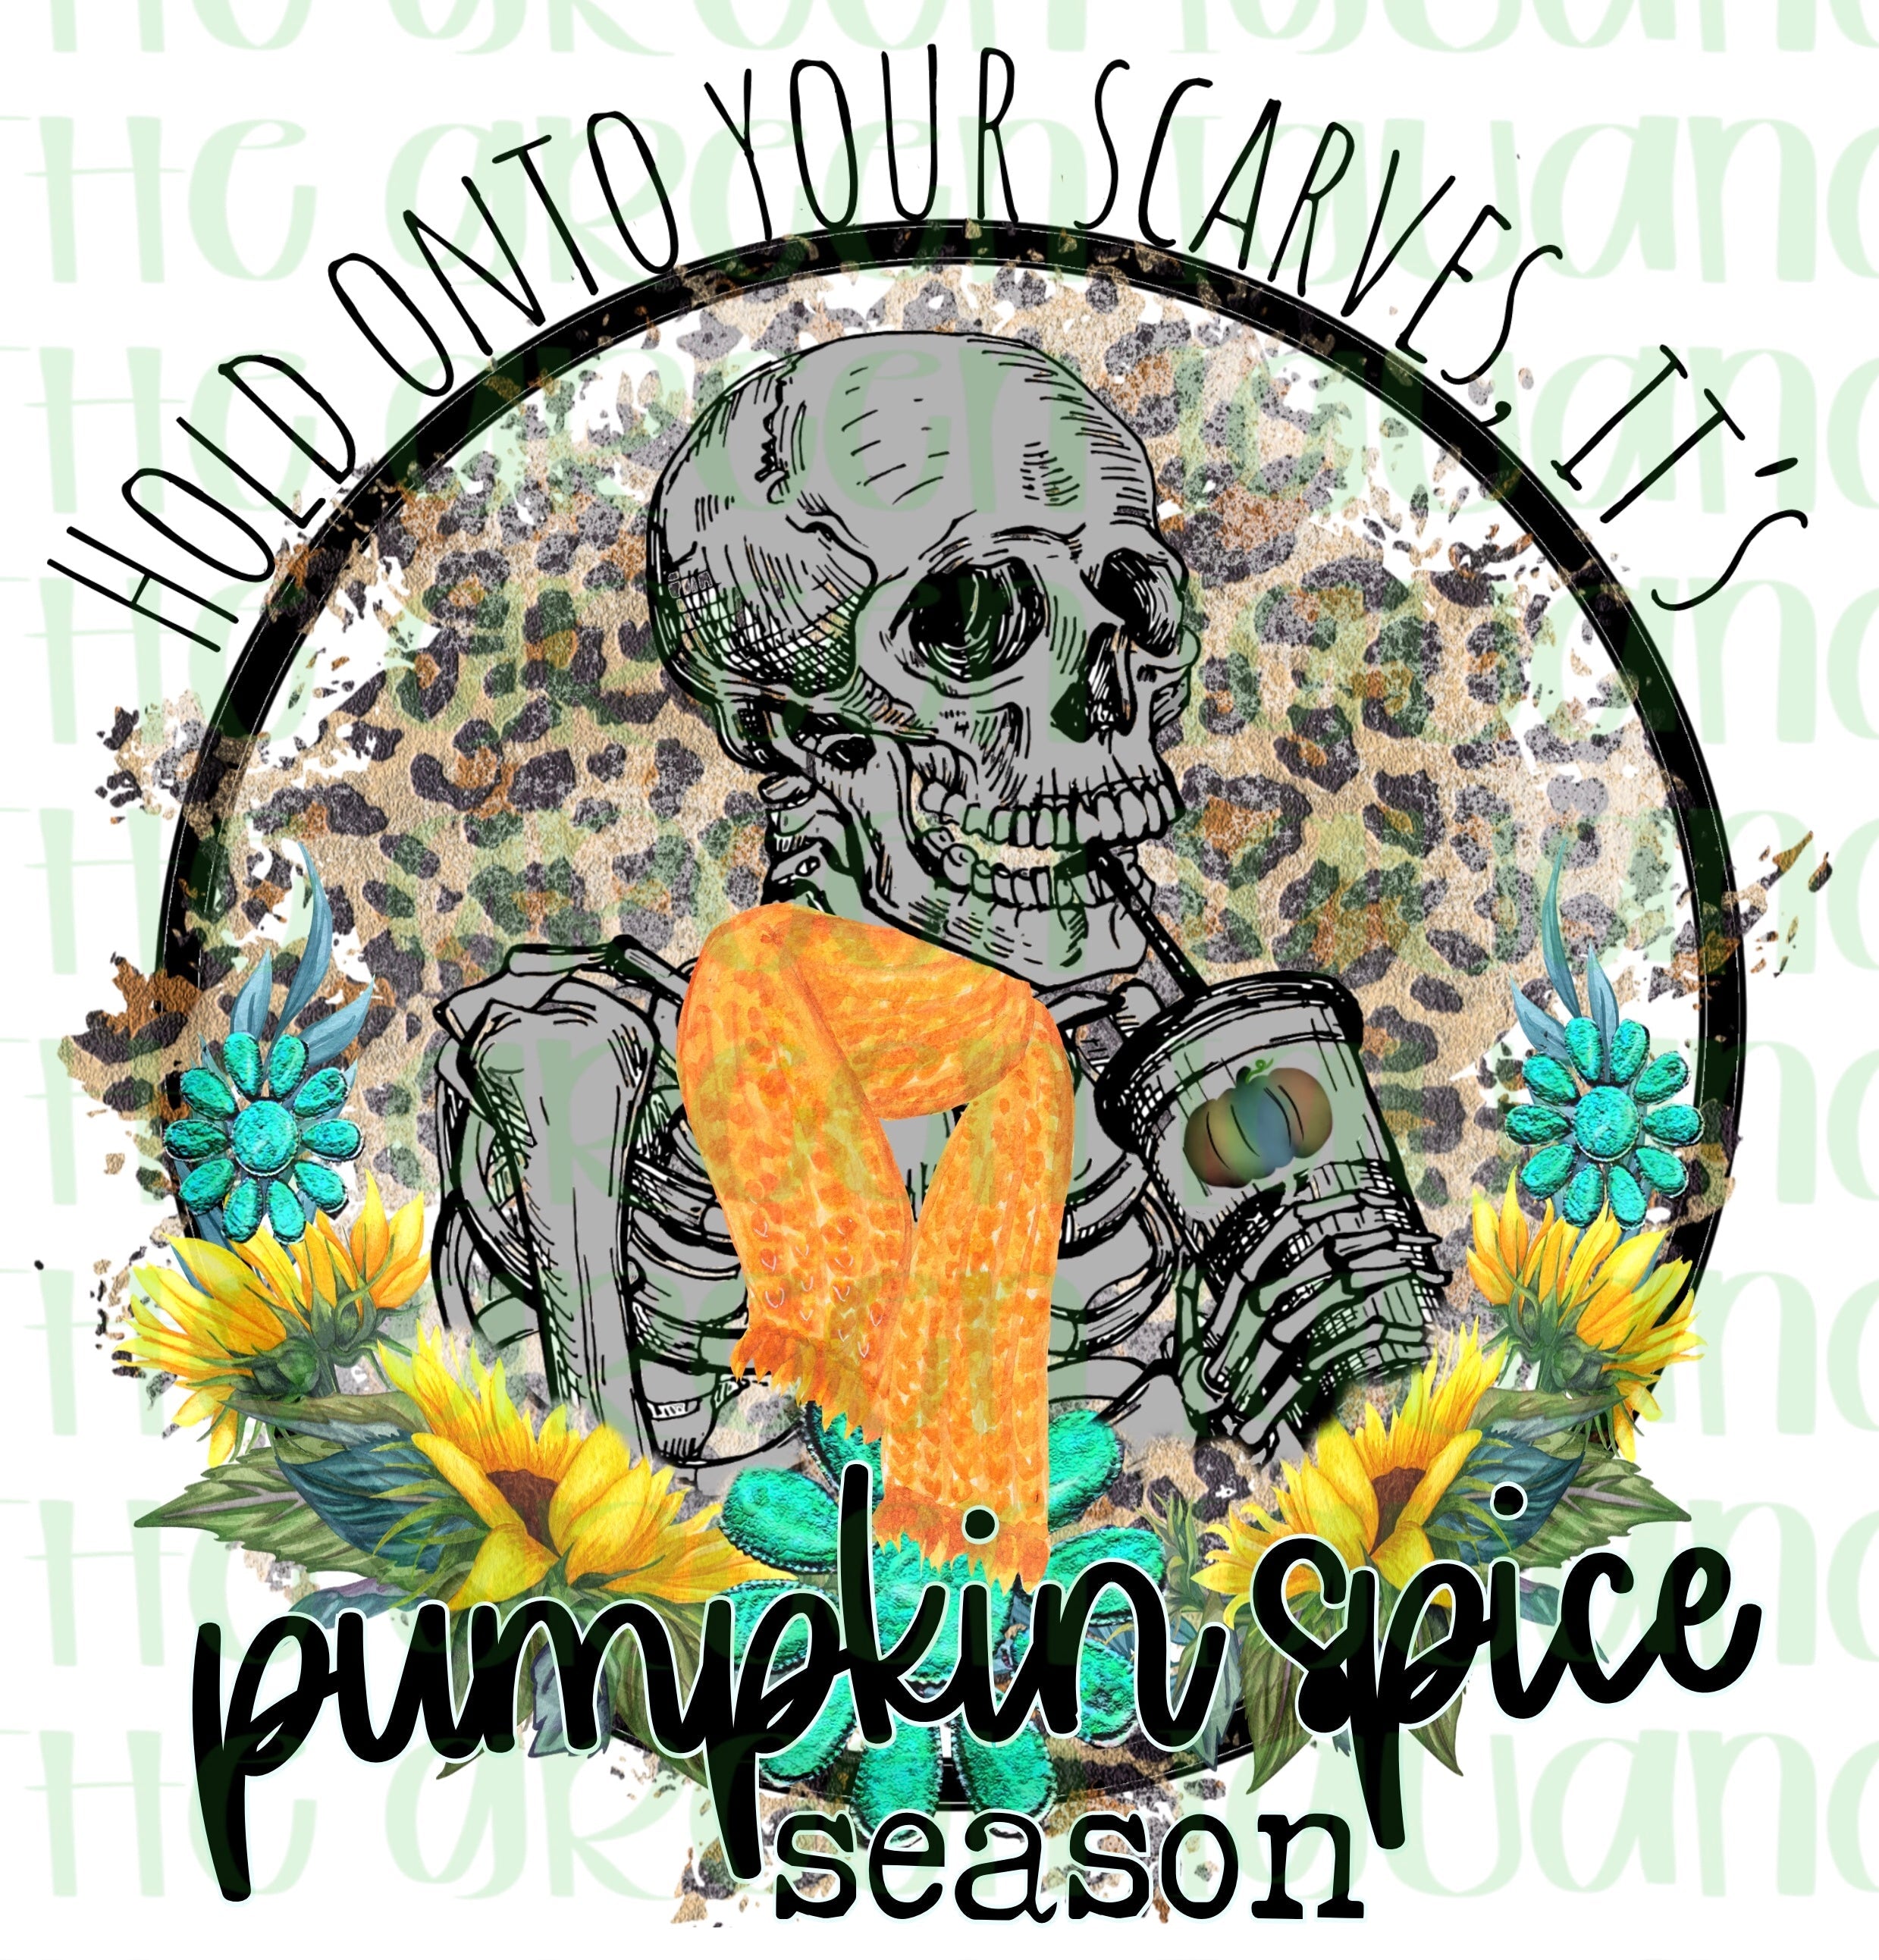 Hold onto your scarves, it’s pumpkin spice season - DTF transfer